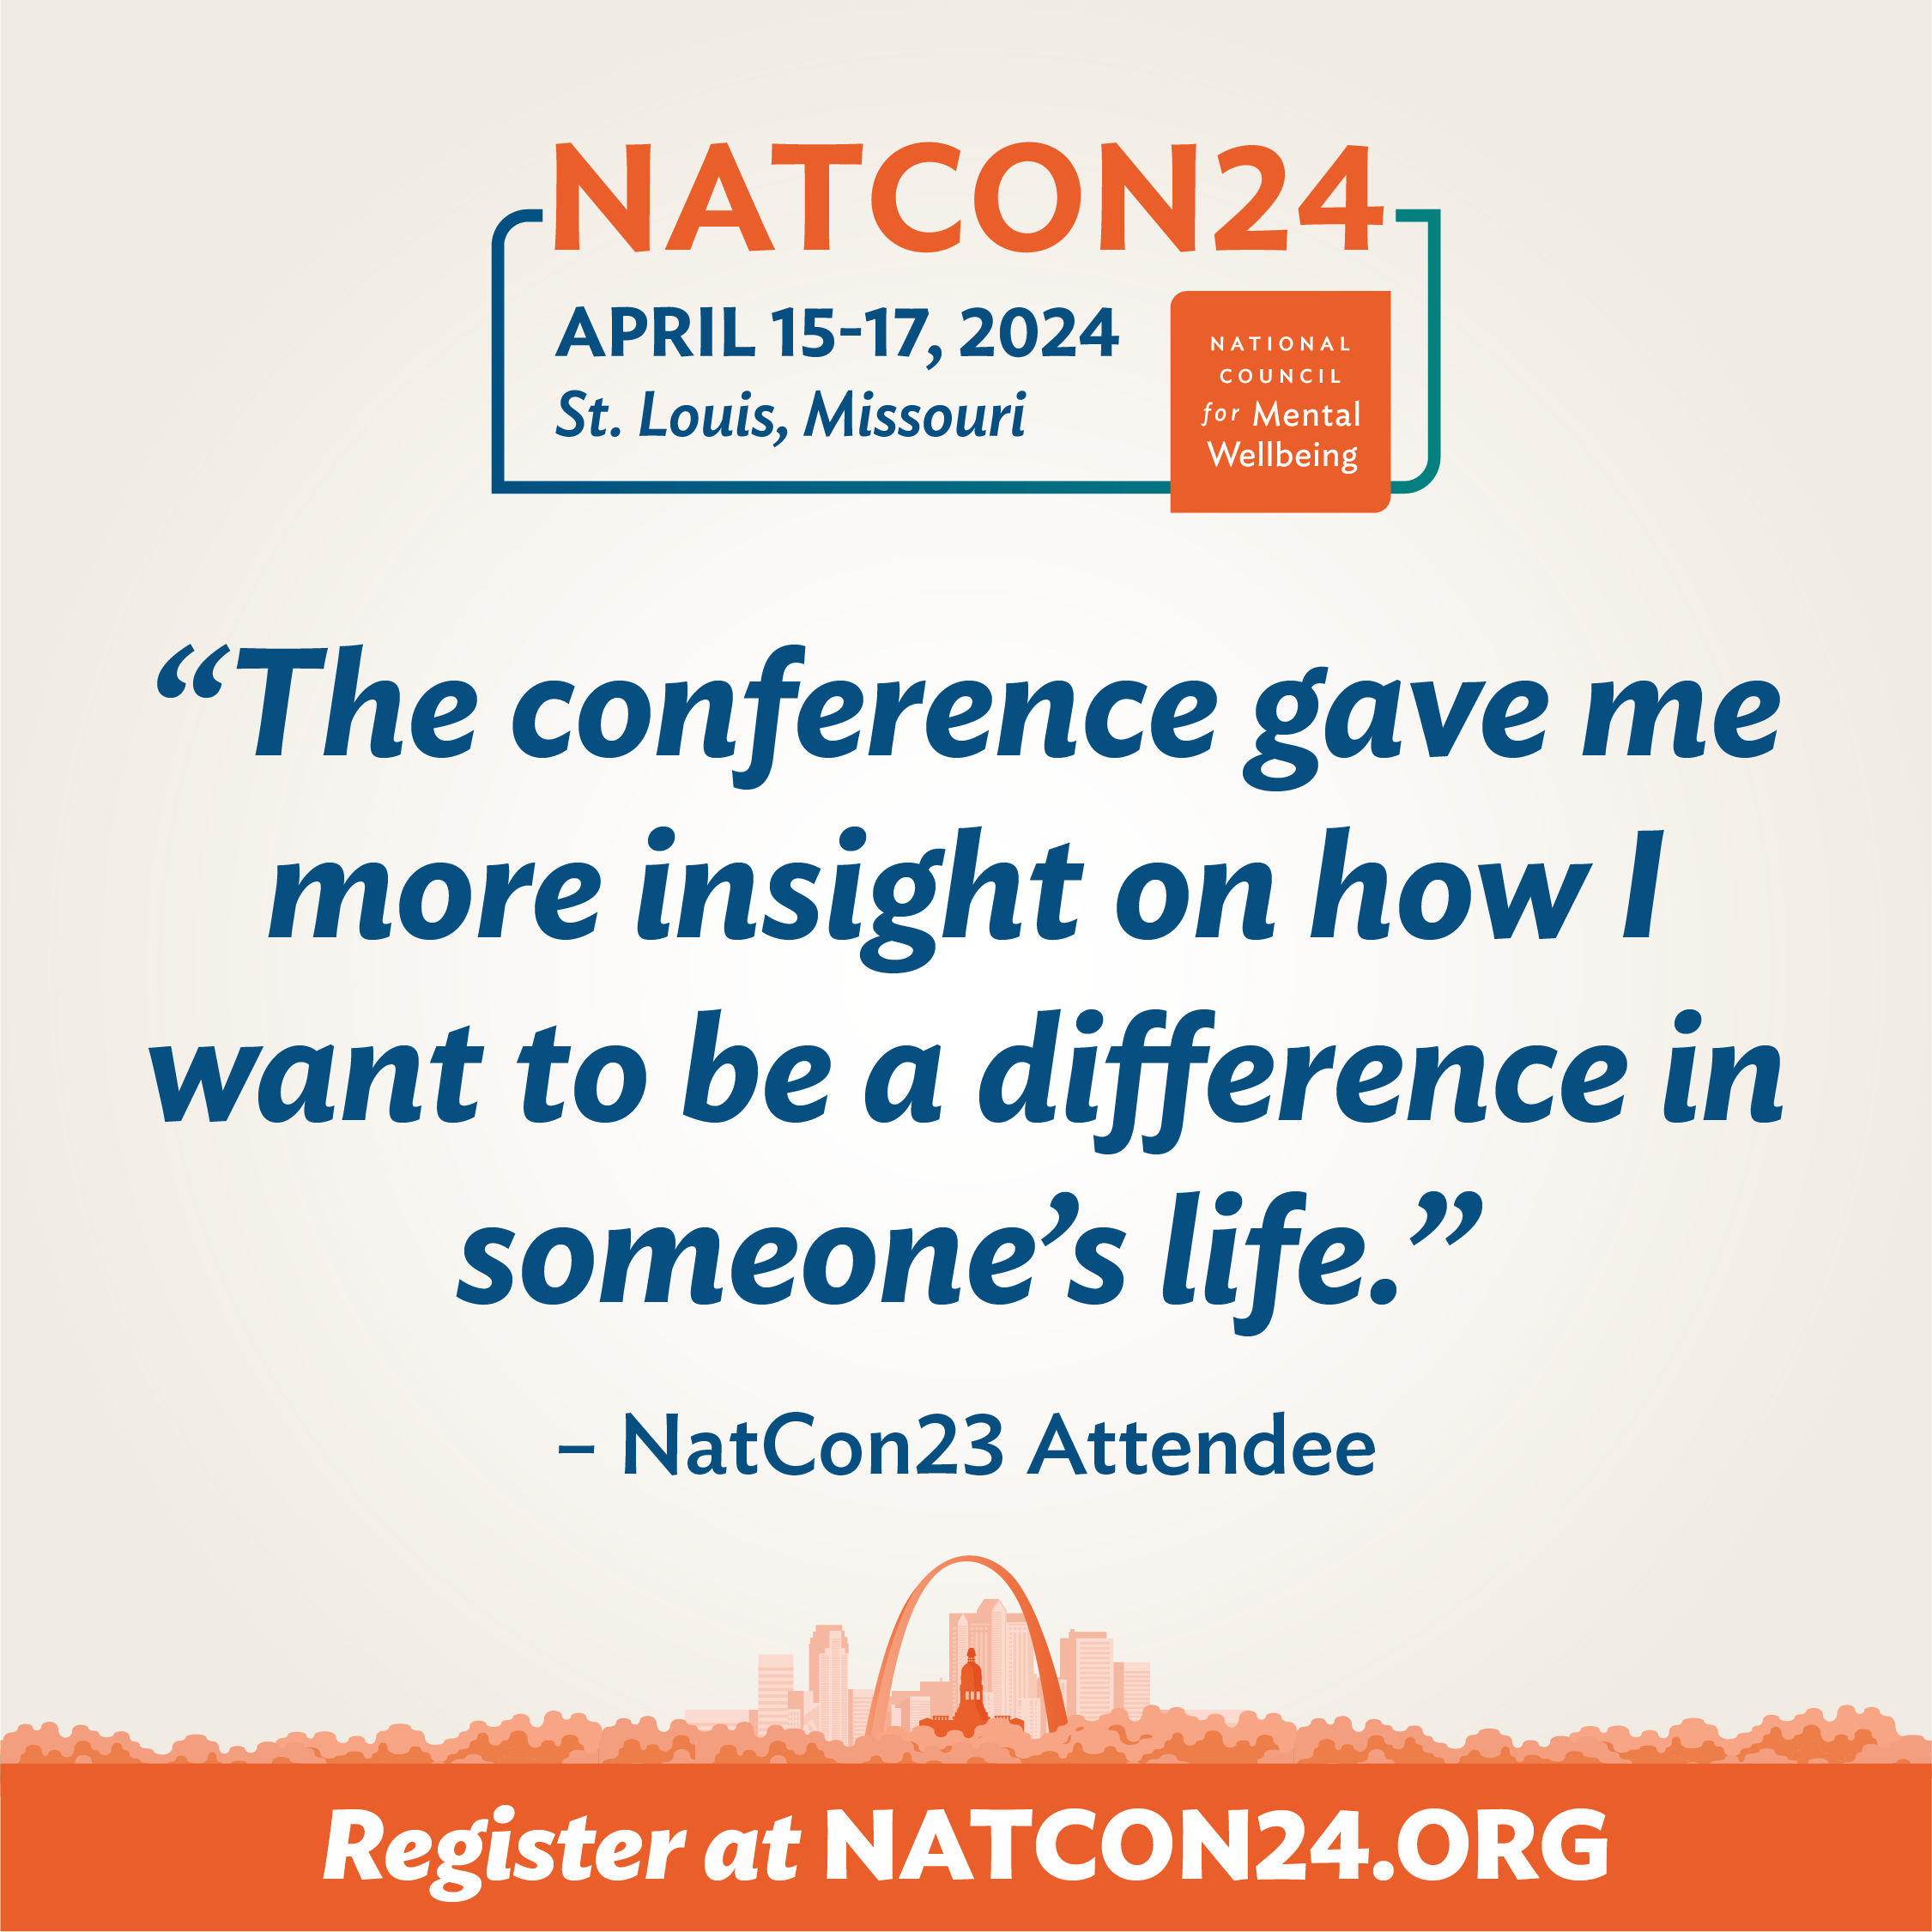 "The conference gave me more insight on how I want to be a difference in someone's life." - NatCon23 Attendee